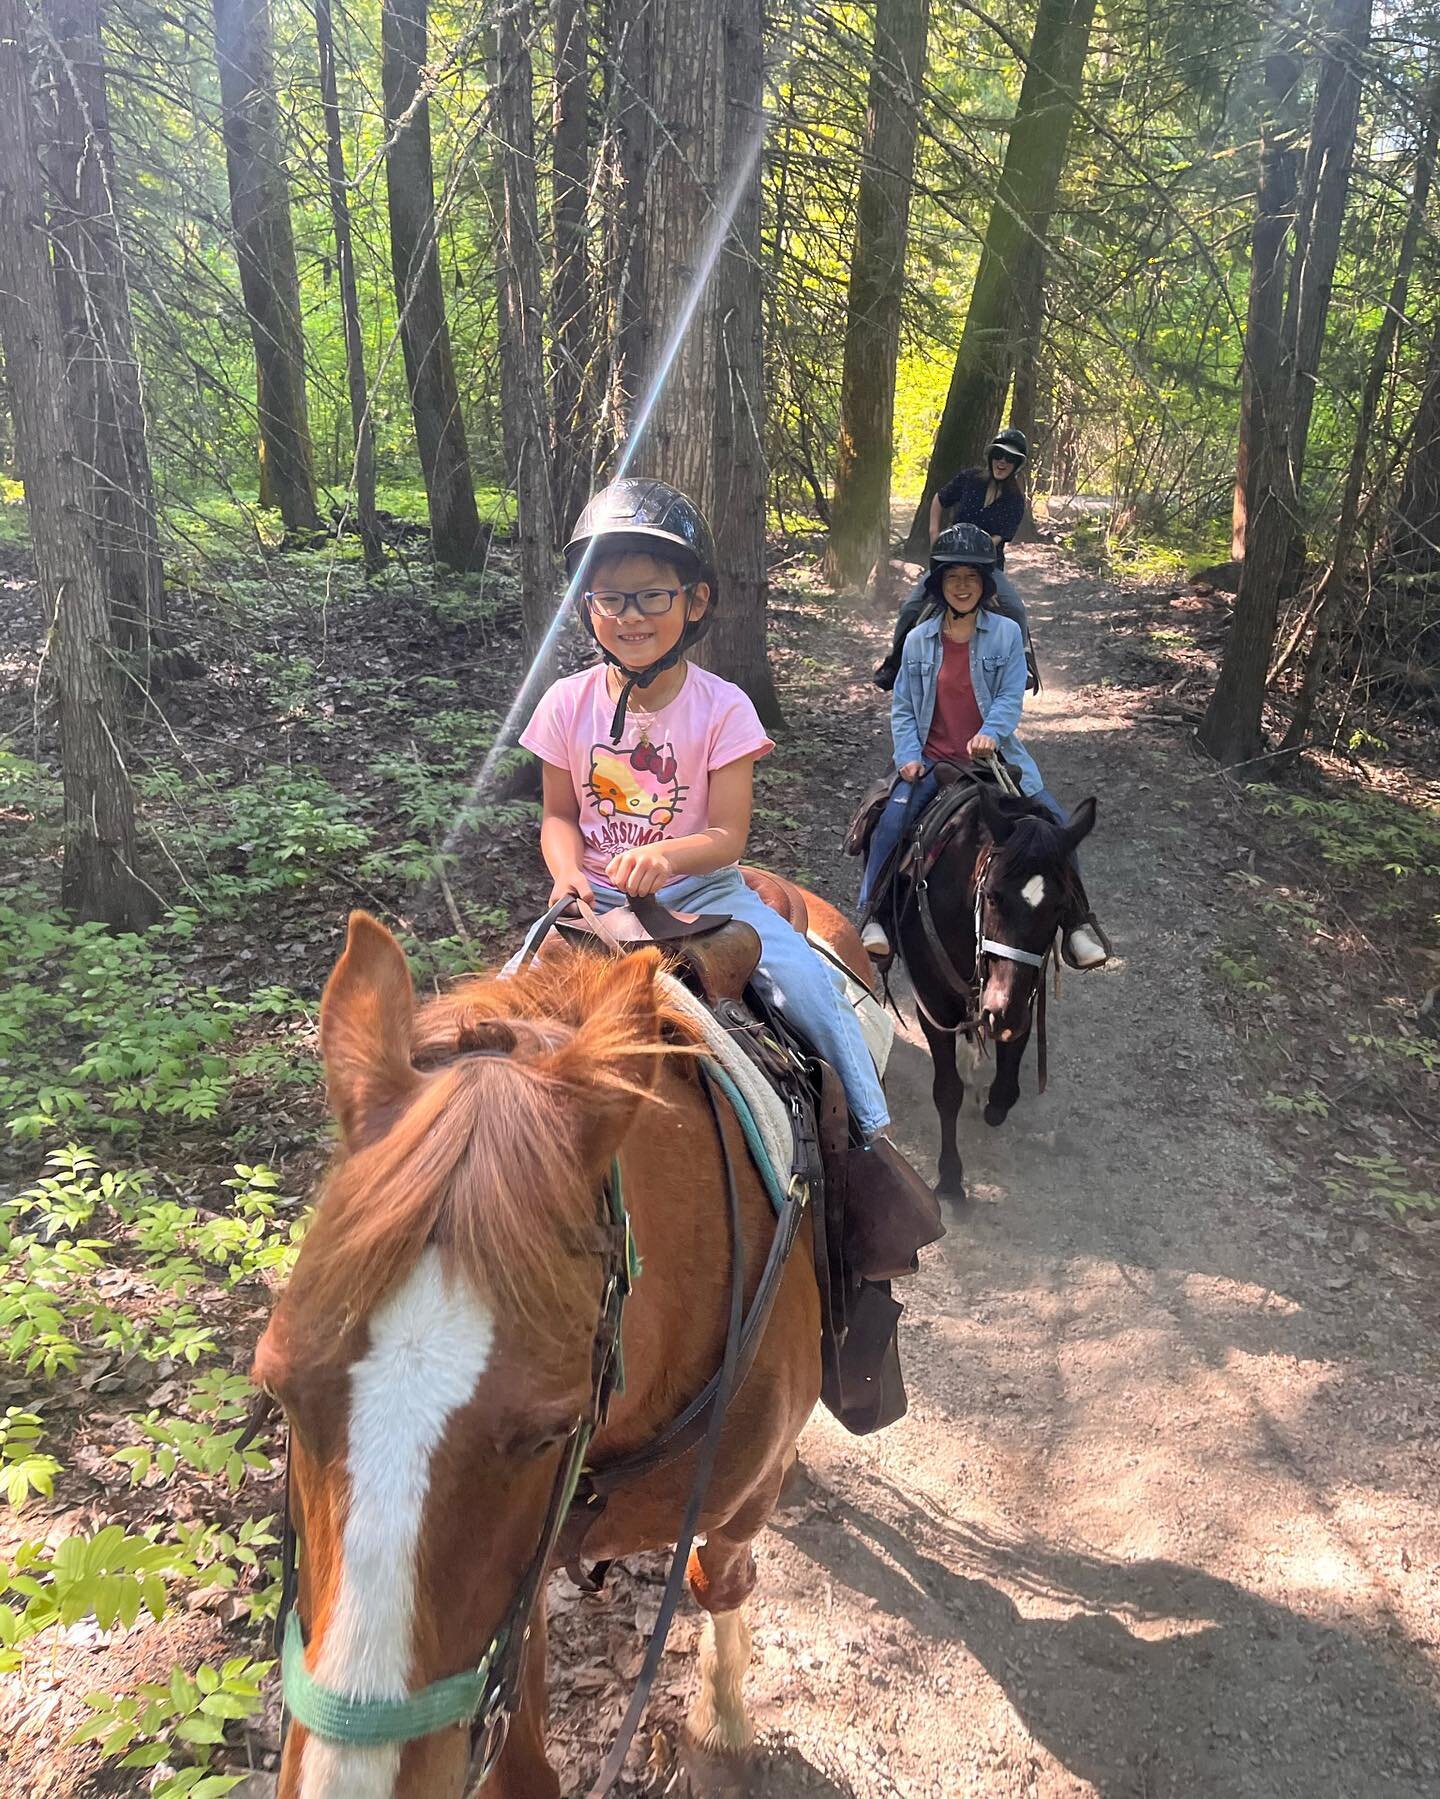 We have a BIG soft spot for our LITTLE riders 😊  It&rsquo;s so rewarding to see littles appreciate the thrill and peace of horse riding. Sometimes these seemingly little experiences have the biggest impact on our futures and values. 

We experience 